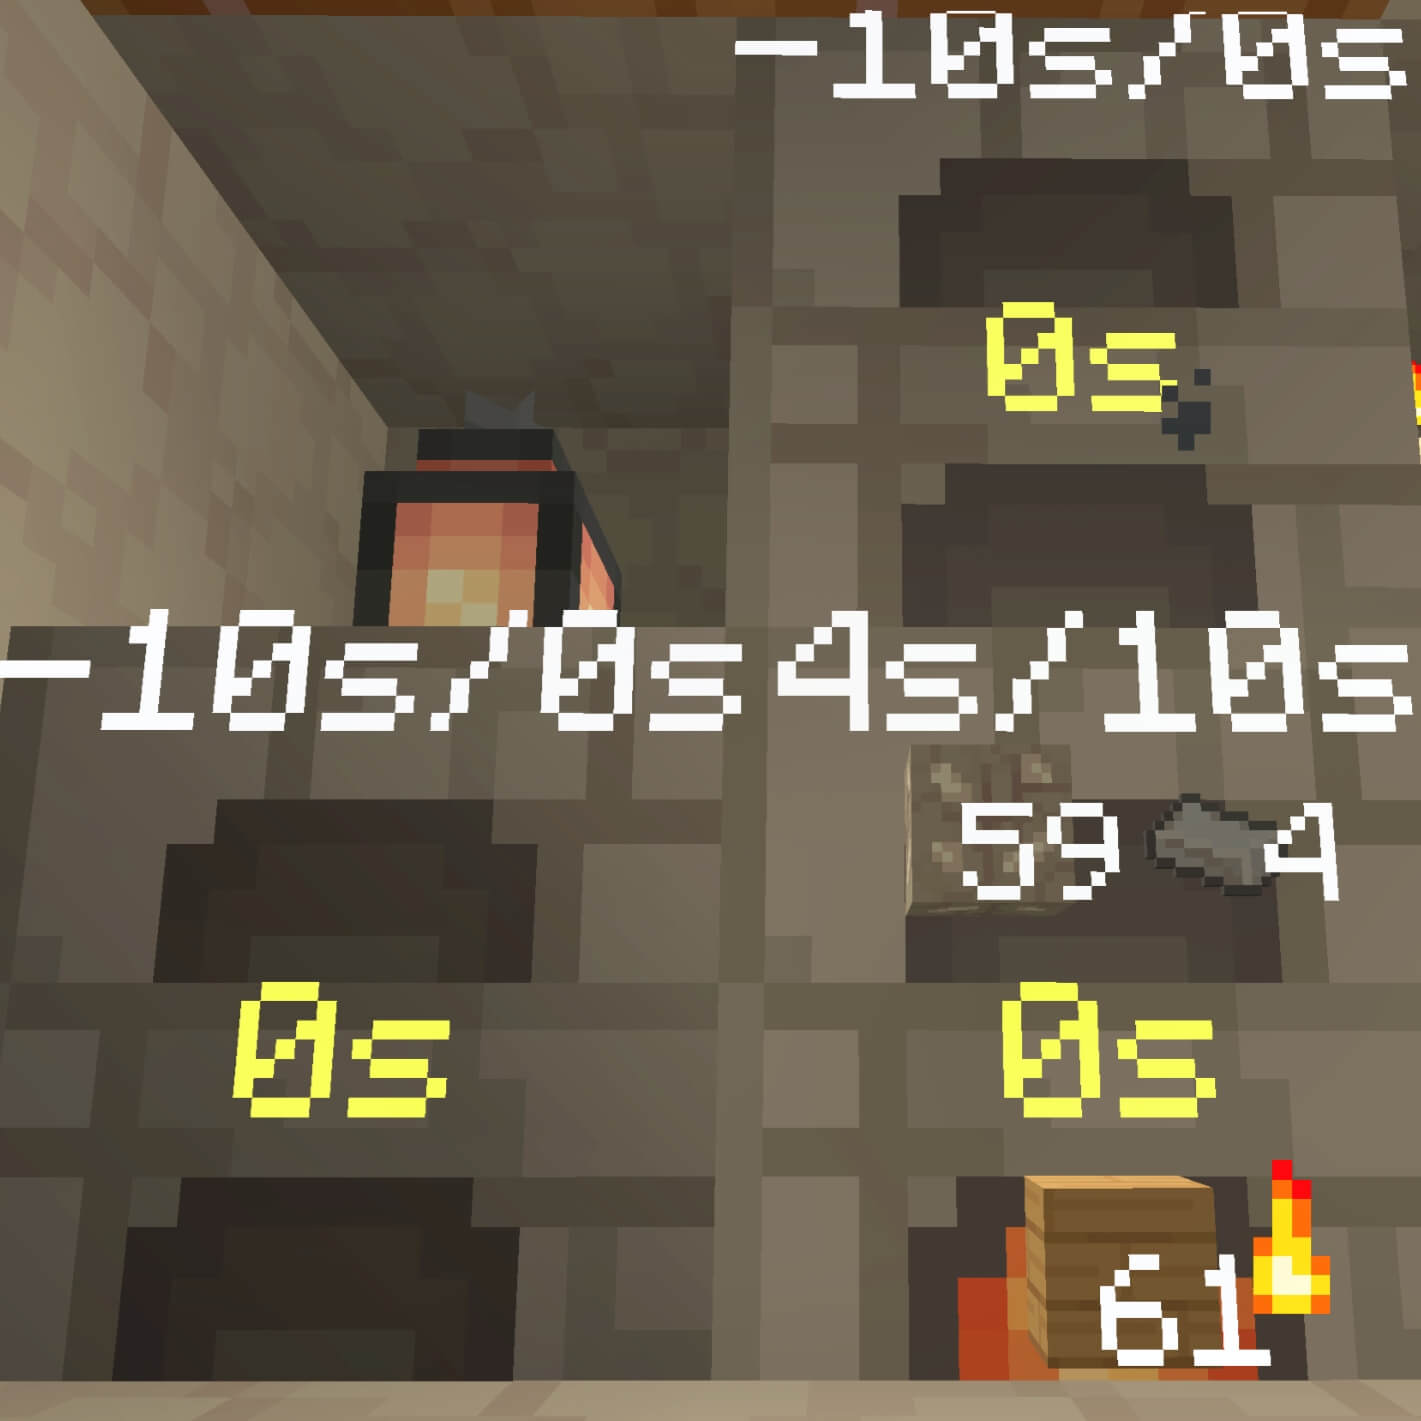 Without UI Furnace